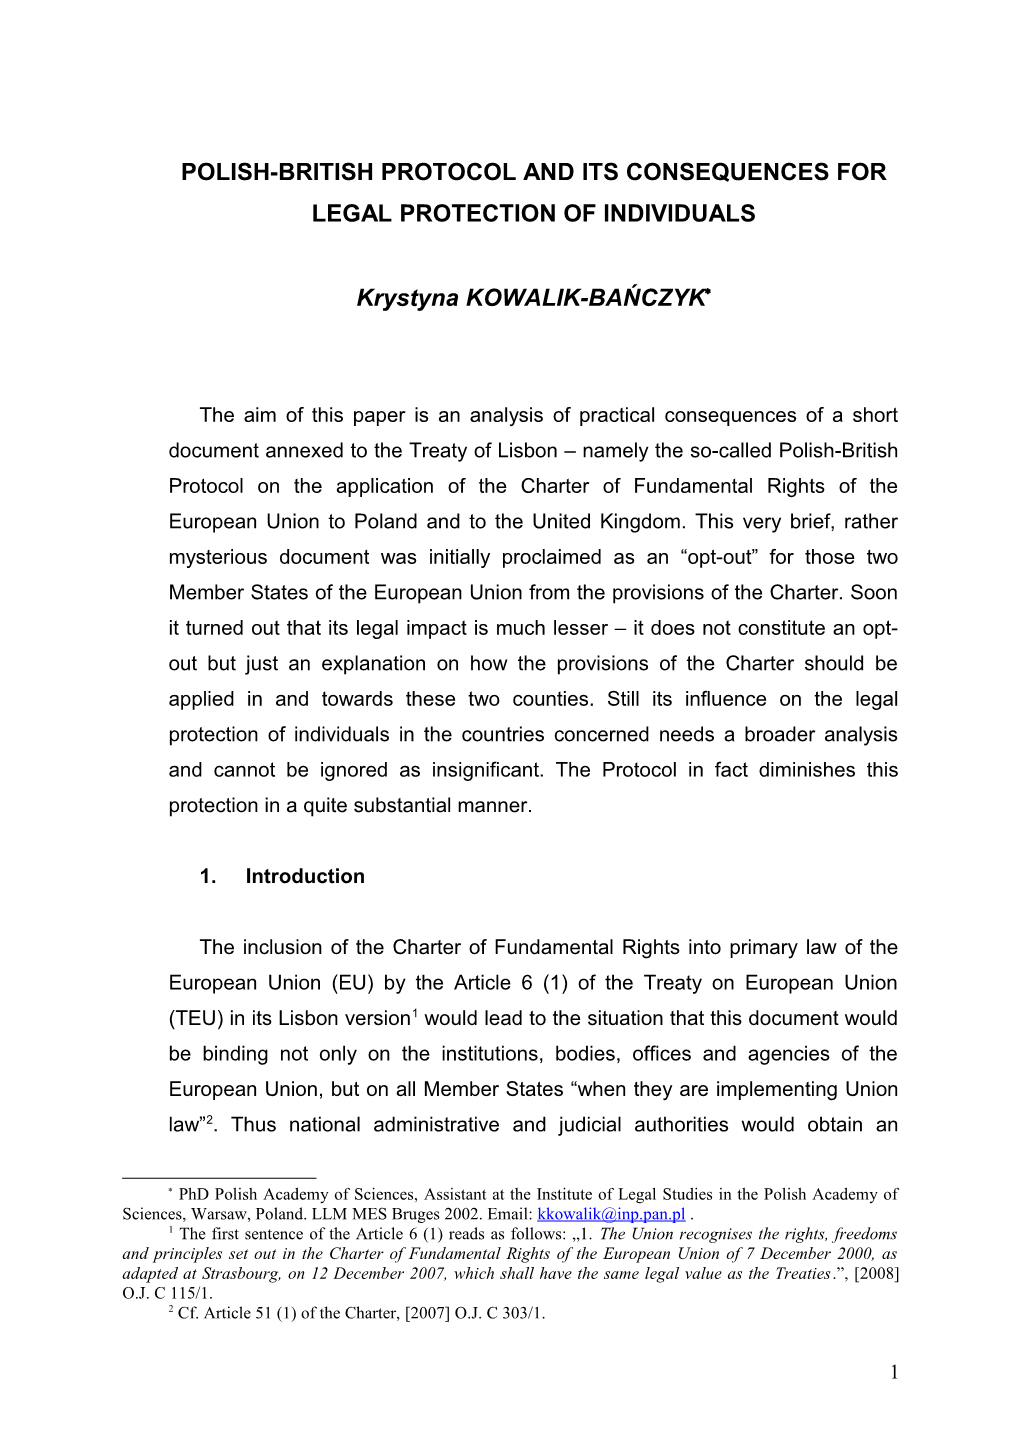 Polish-British Protocol and Its Consequences for Legal Protection of Individuals in Poland